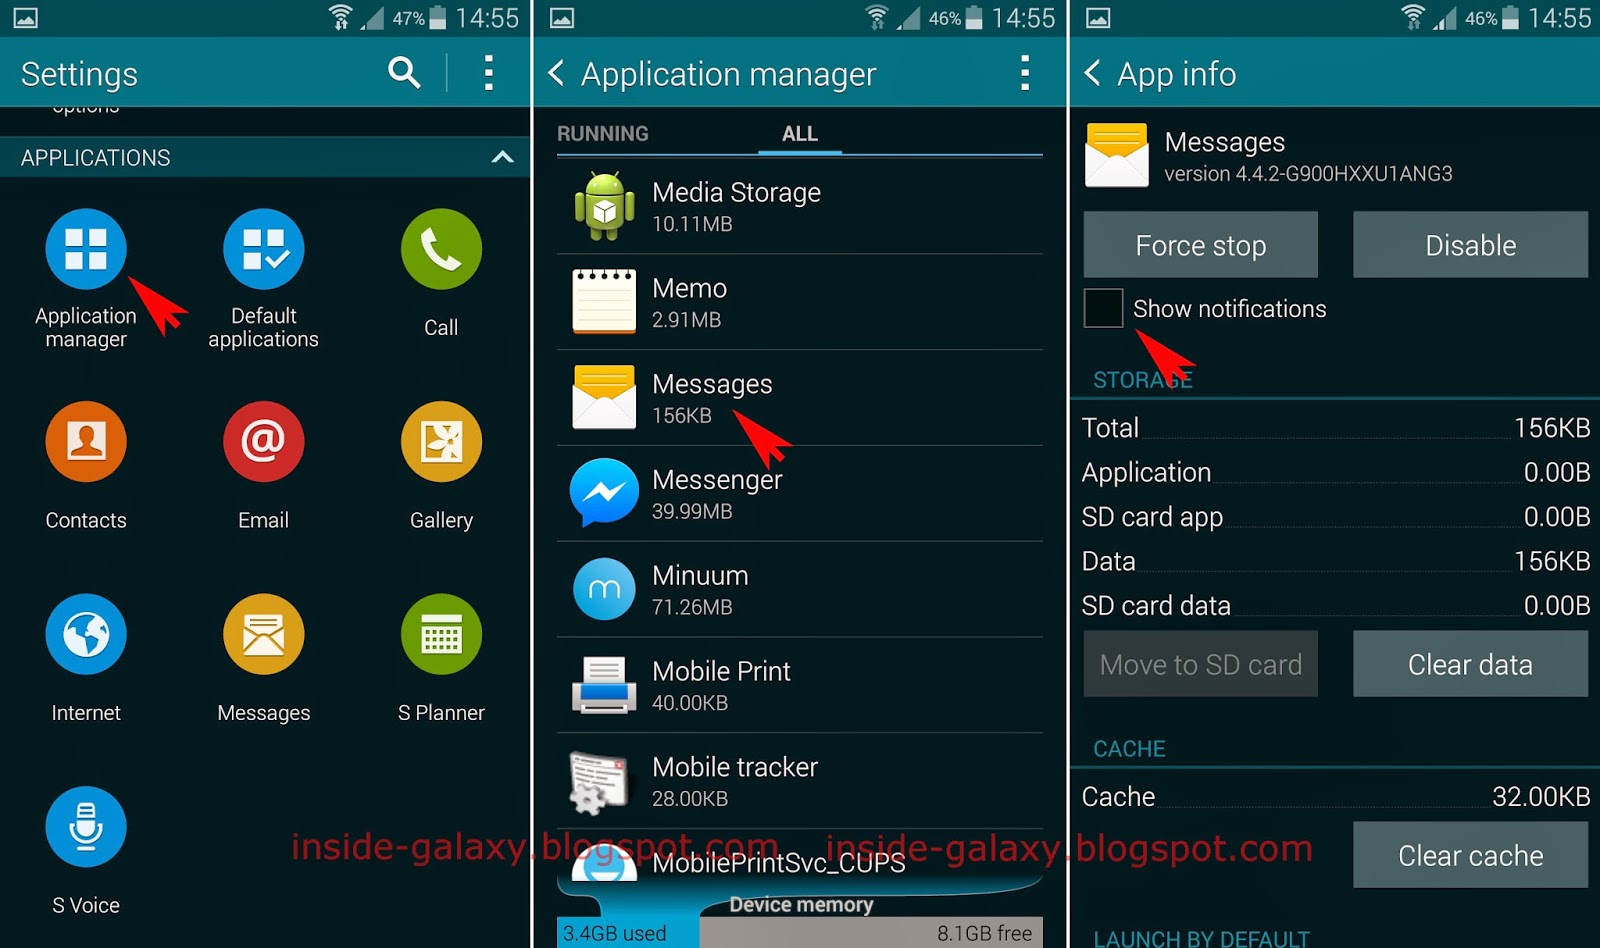 Inside Galaxy Samsung Galaxy S5 How to Disable an App Notifications